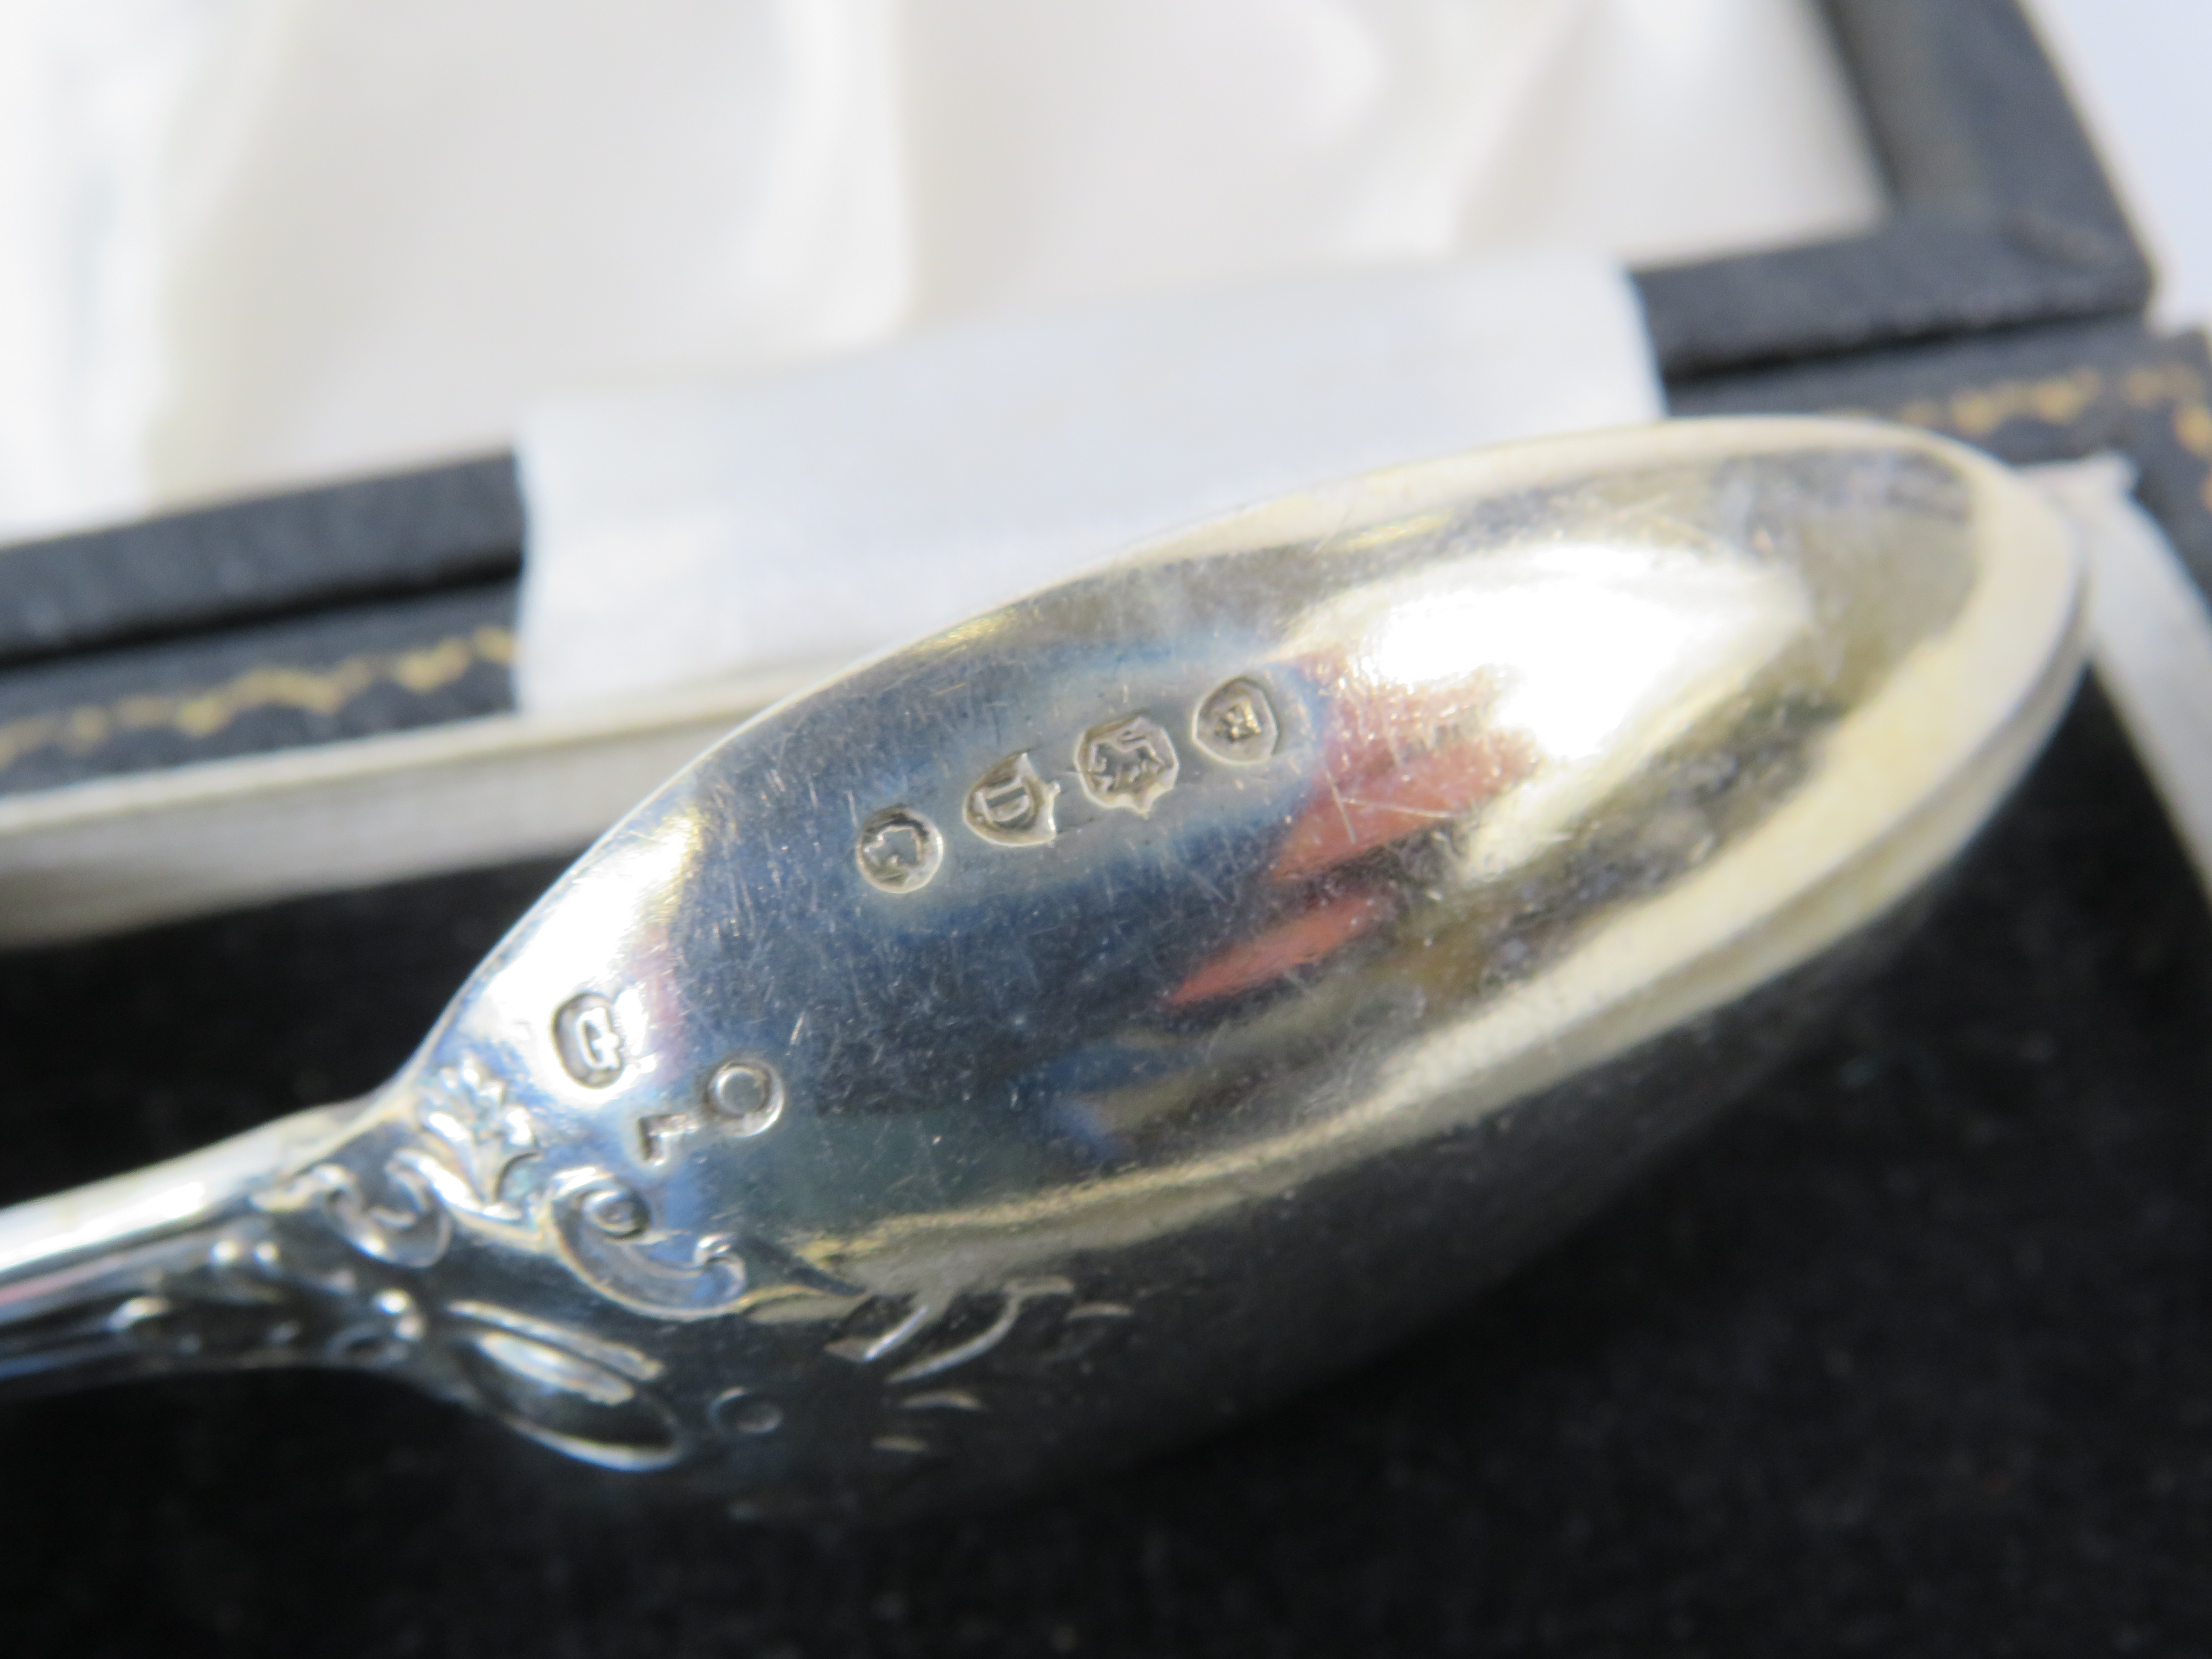 London 1879 Sterling silver cased Fork and spoon set, 61.6 g - Image 3 of 4